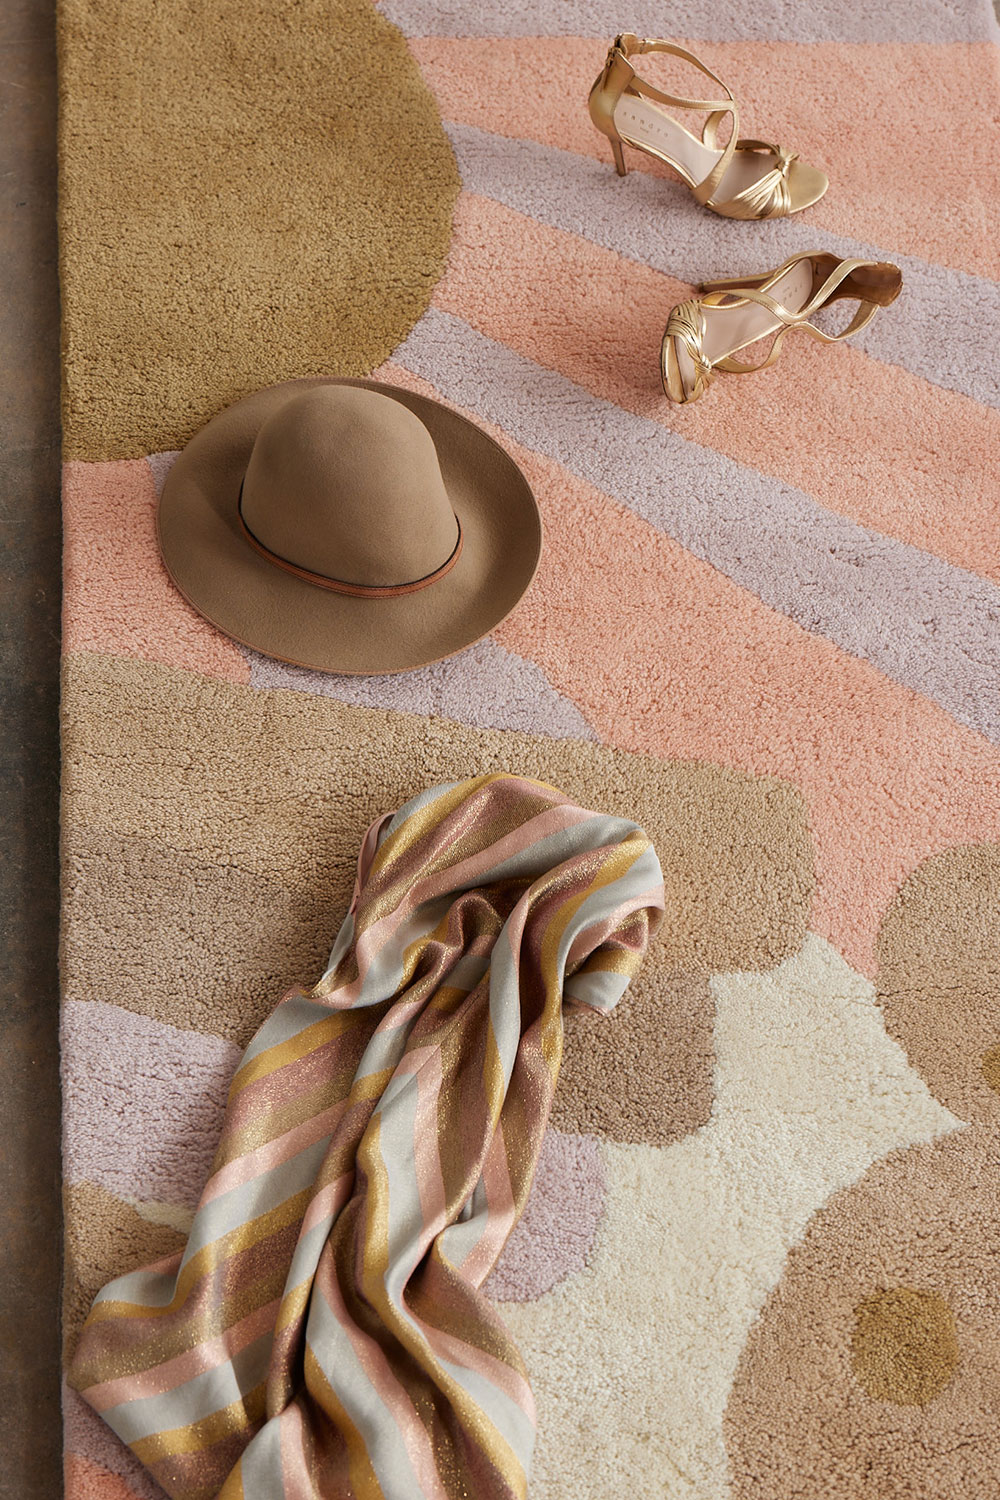 Hat, shoes, and scarf on a cream colored, modern area rug by Angela Adams called Daytrip Lovely